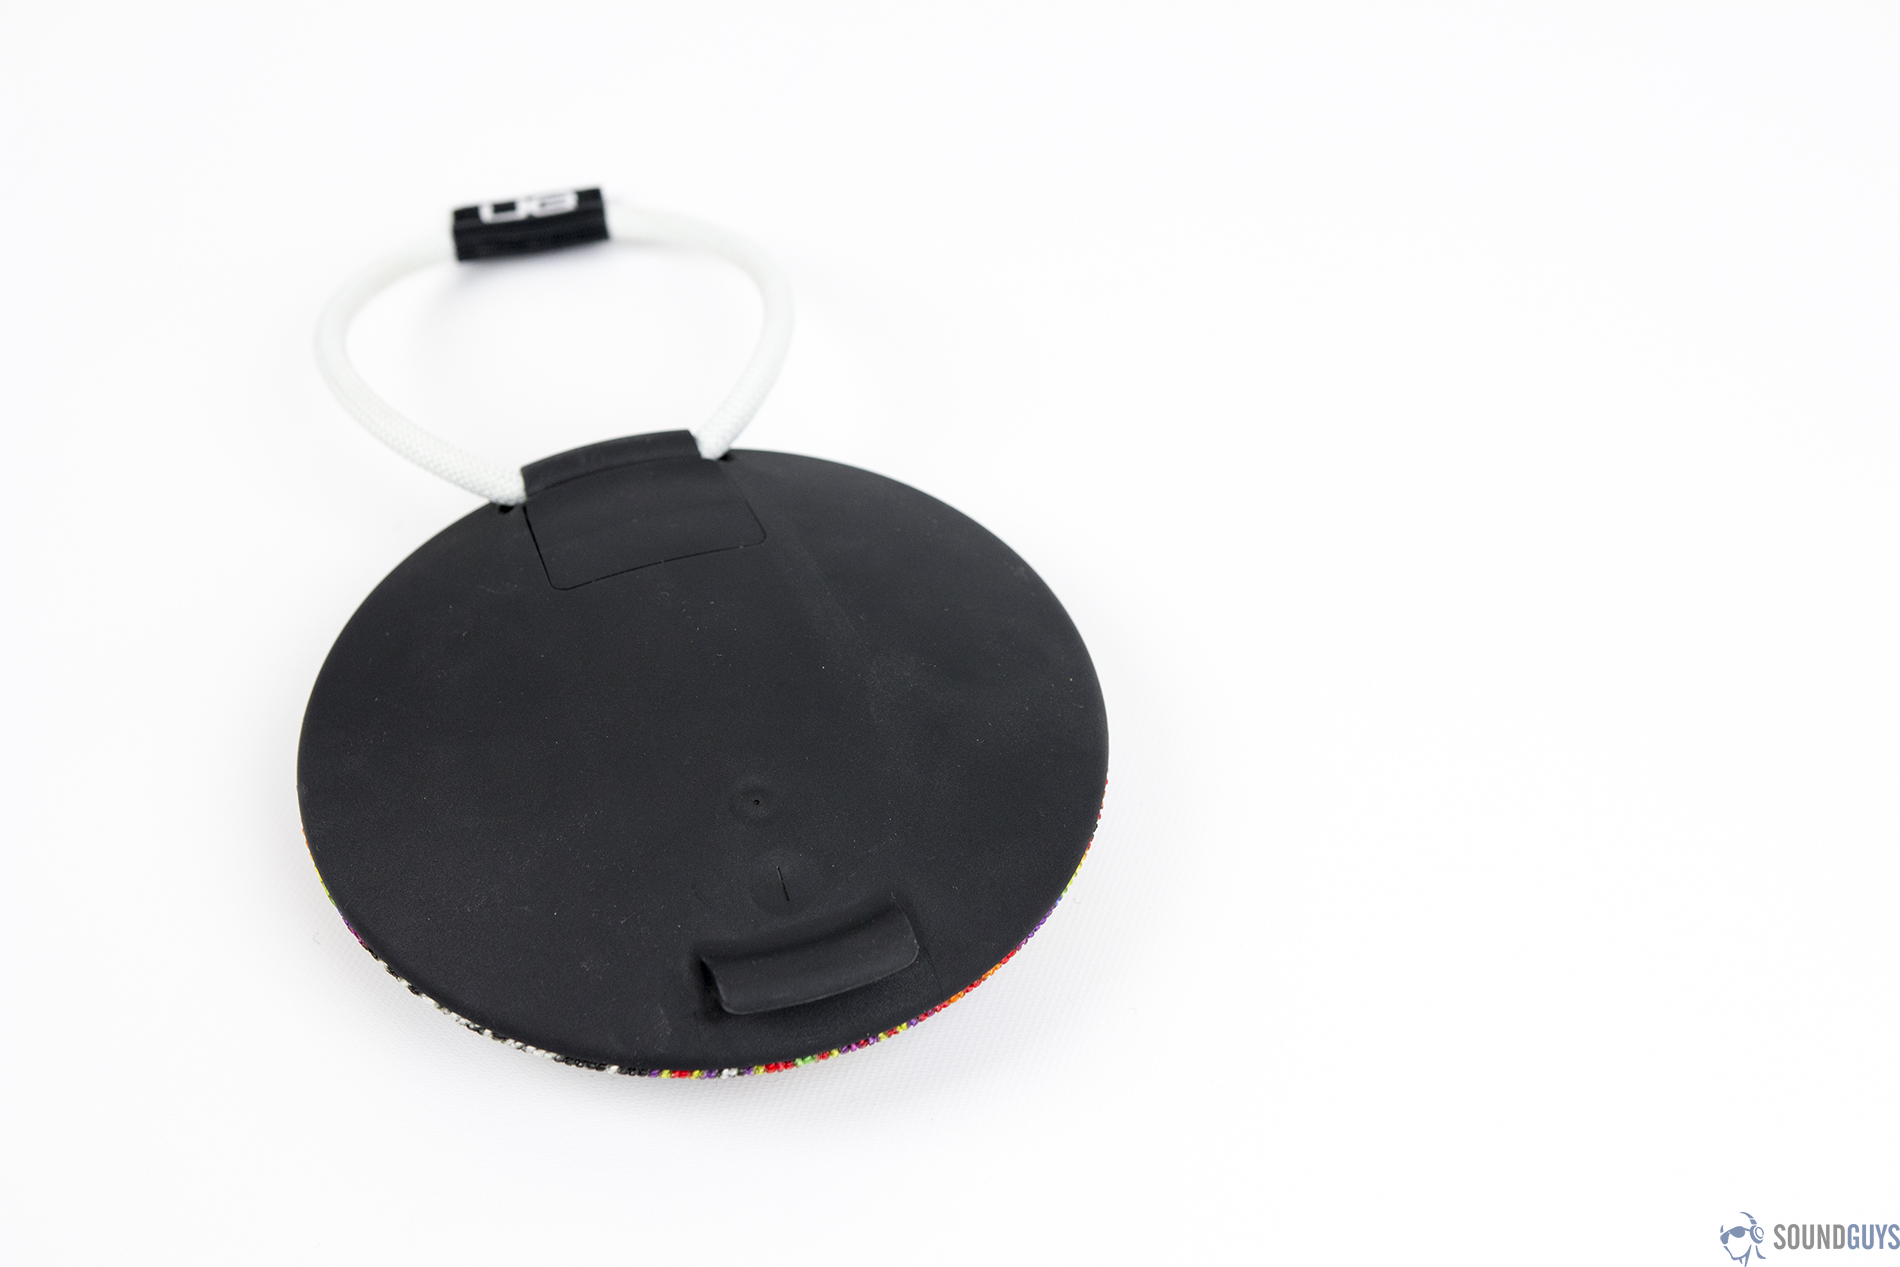 An angled, overhead view of the rear of a UE Roll 2 on a white background.